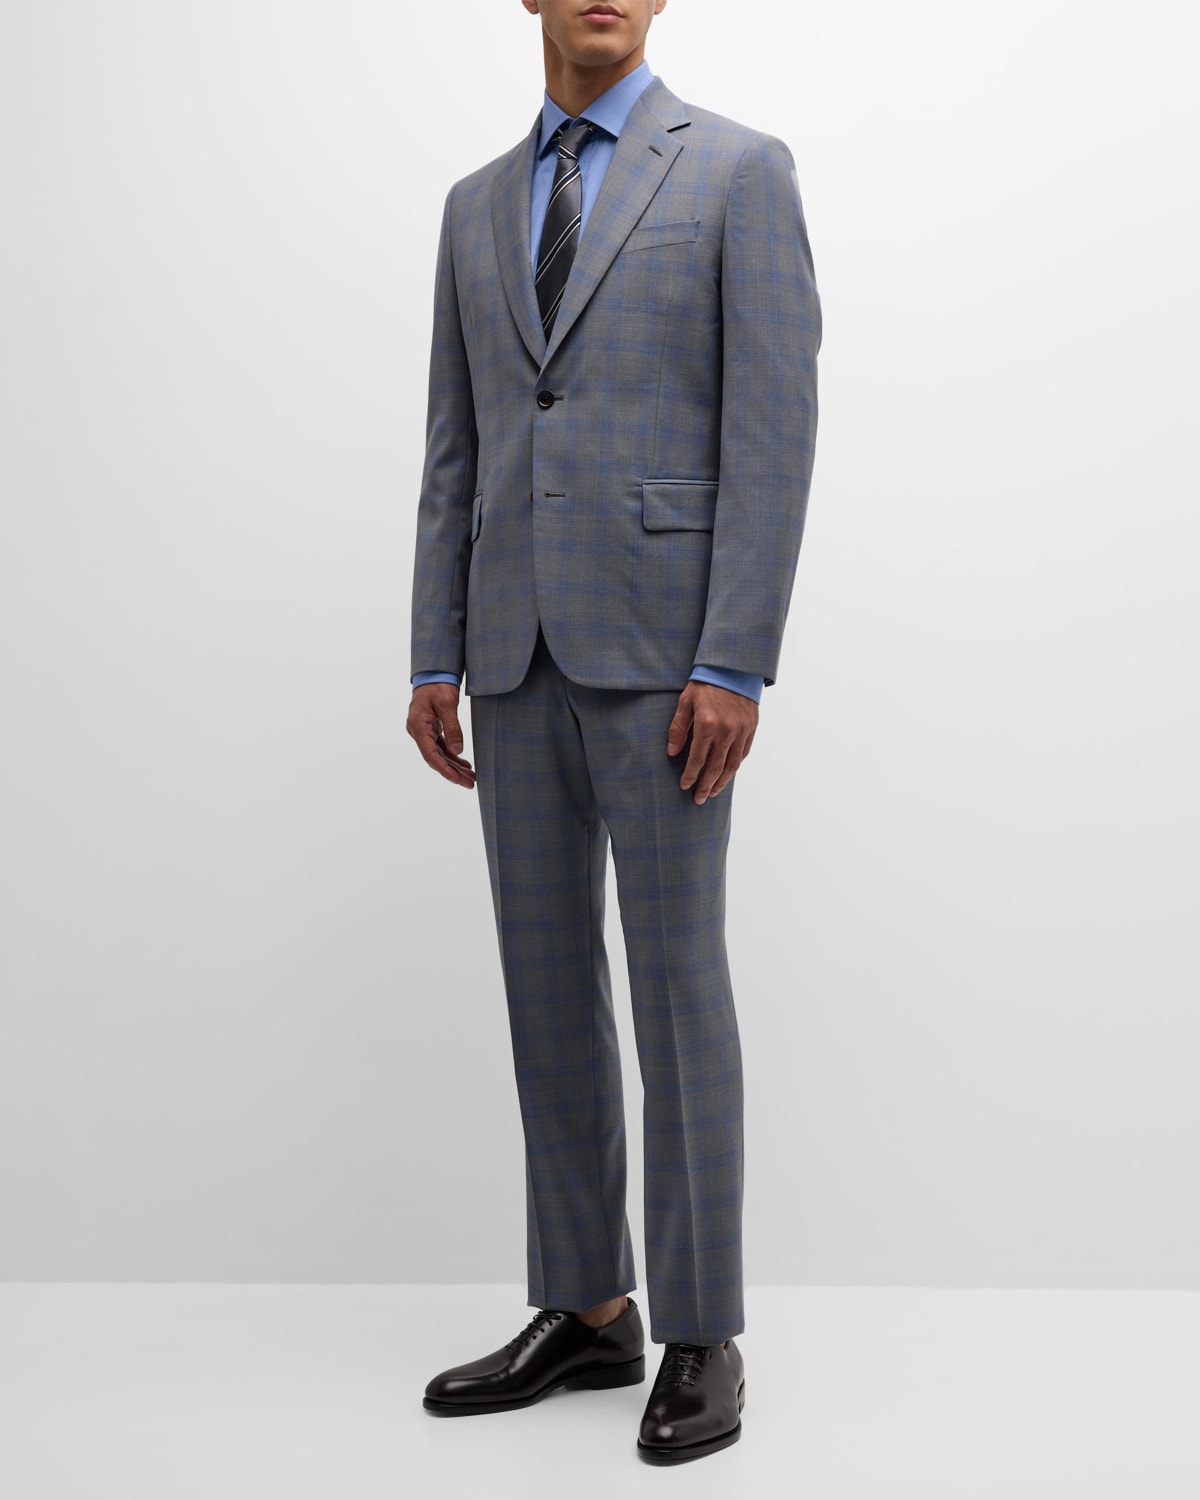 Paul Smith Men's Tailored Fit Check Suit In Grey